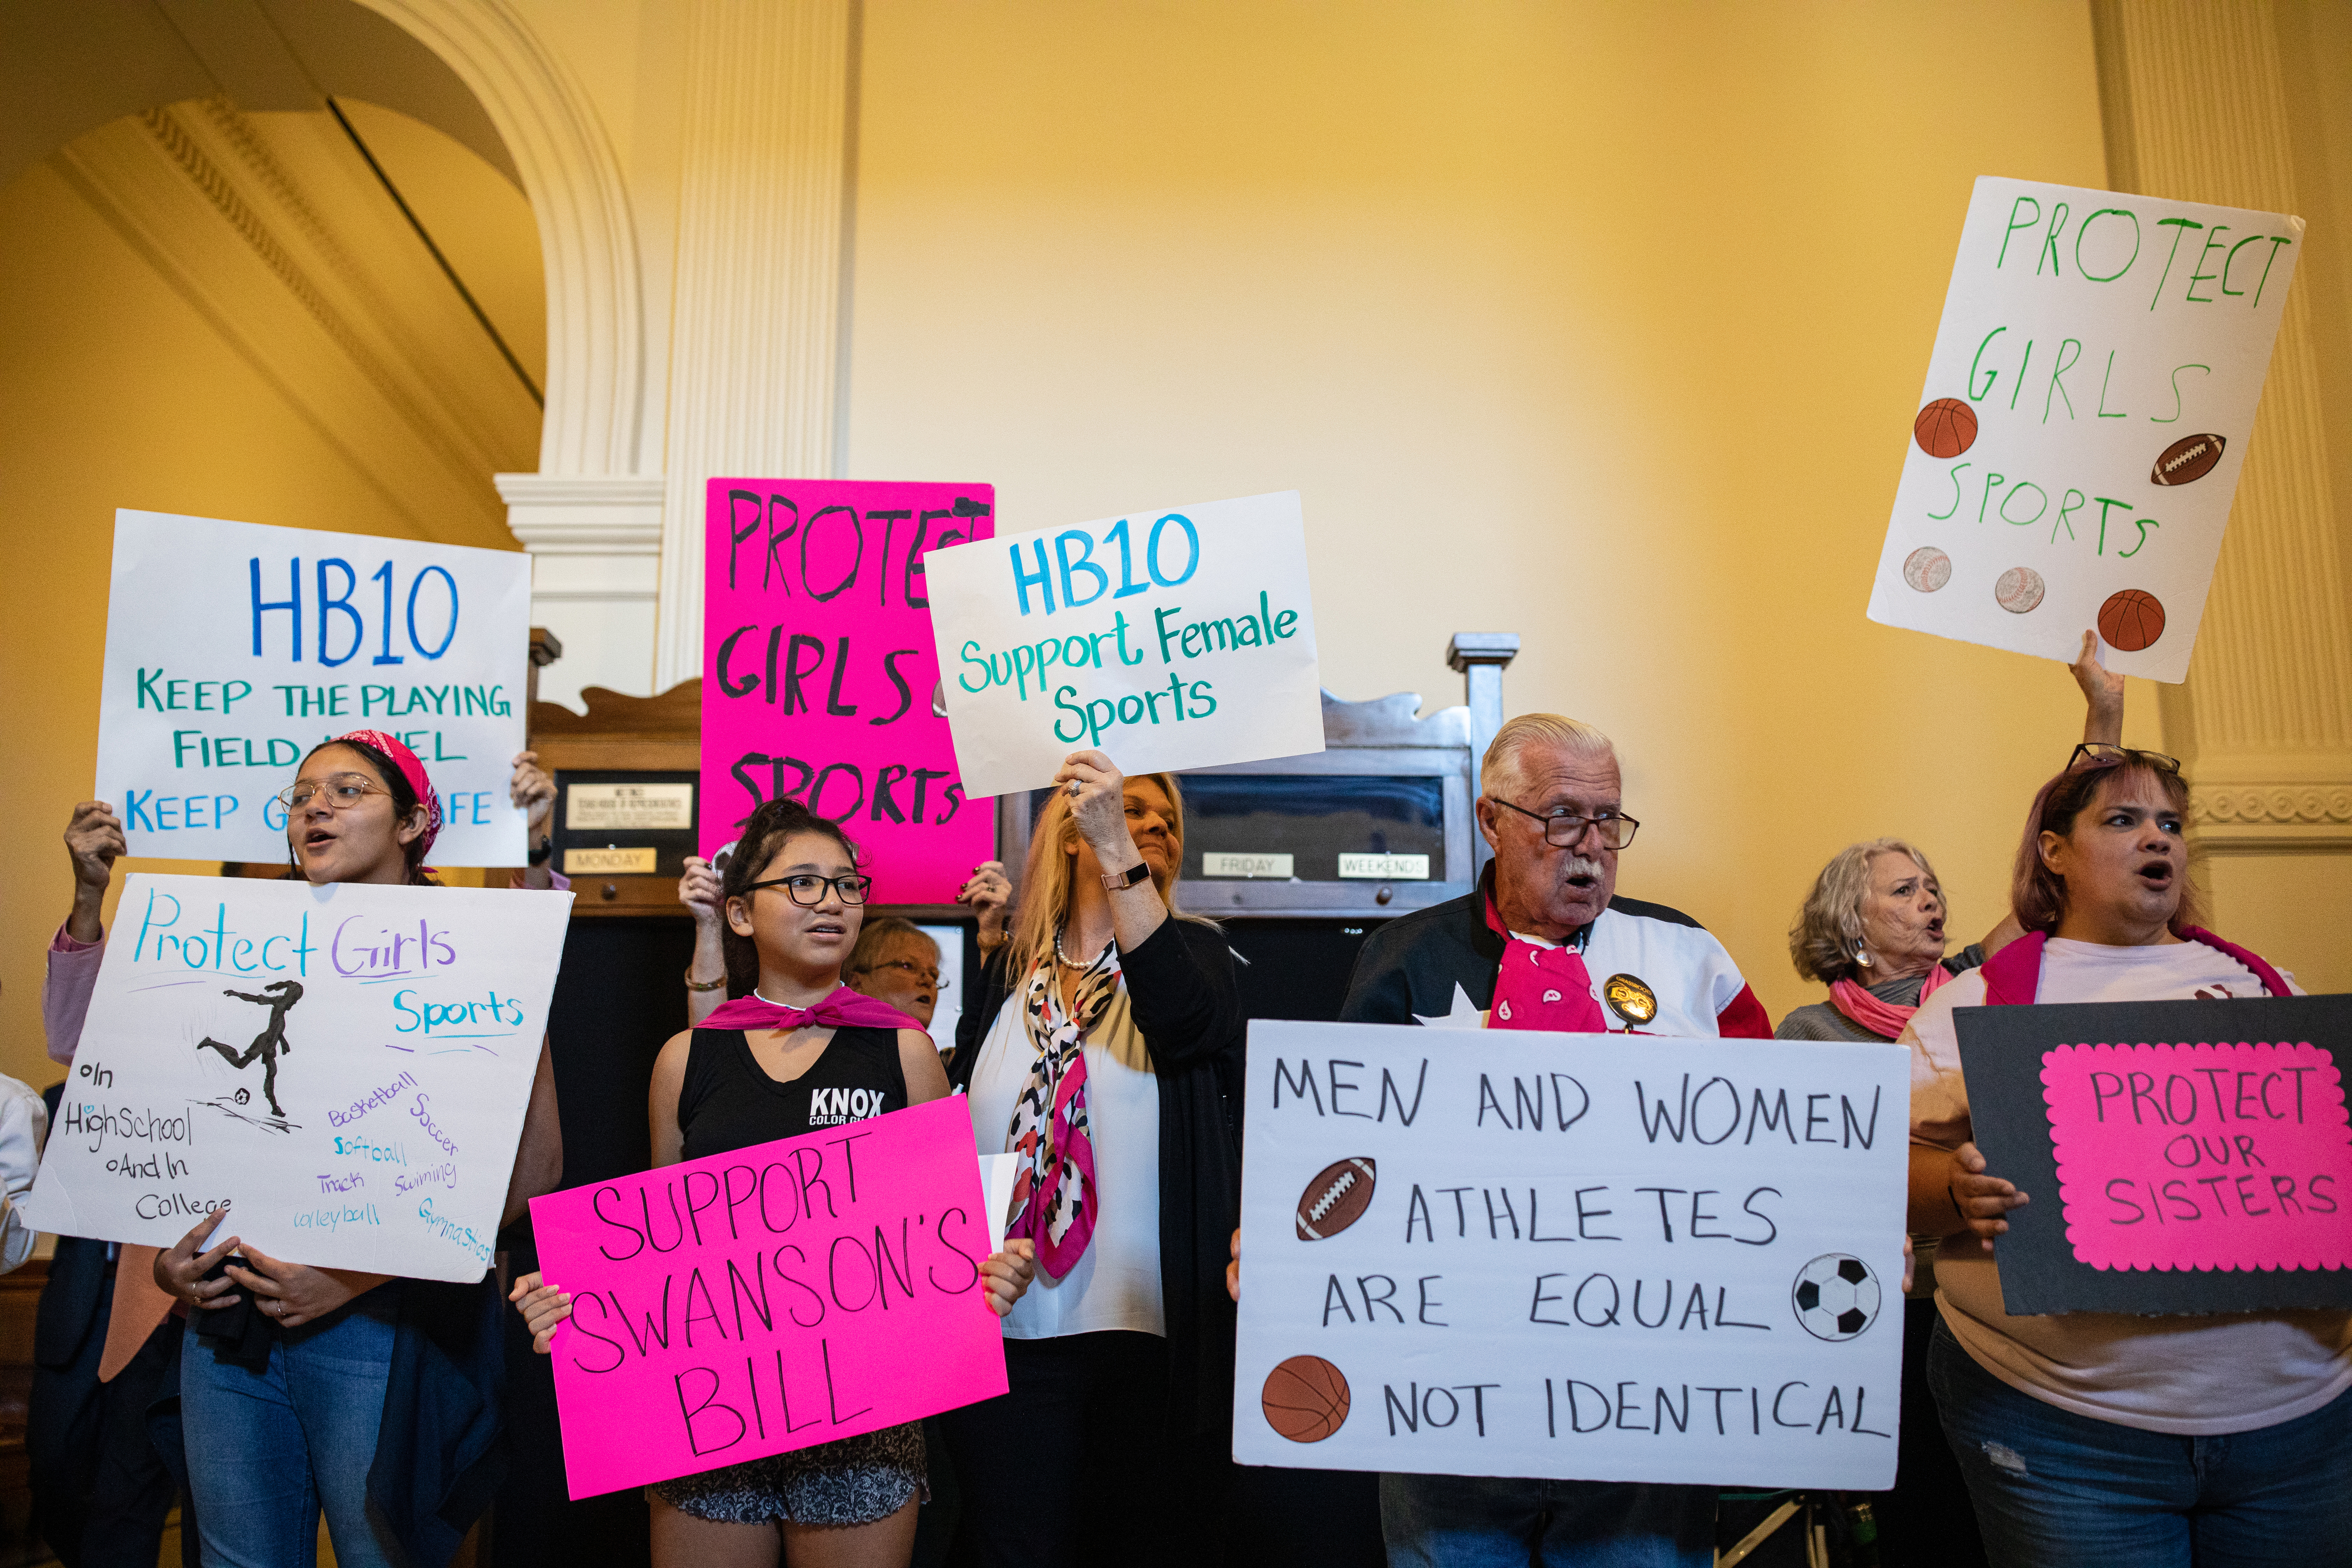 Demonstrators supporting a bill that bans trans girls and women from participating in women's athletics gather at the Texas State Capitol on the first day of the 87th Legislature's third special session in Austin, on Sept. 20, 2021. (Tamir Kalifa—Getty Images)